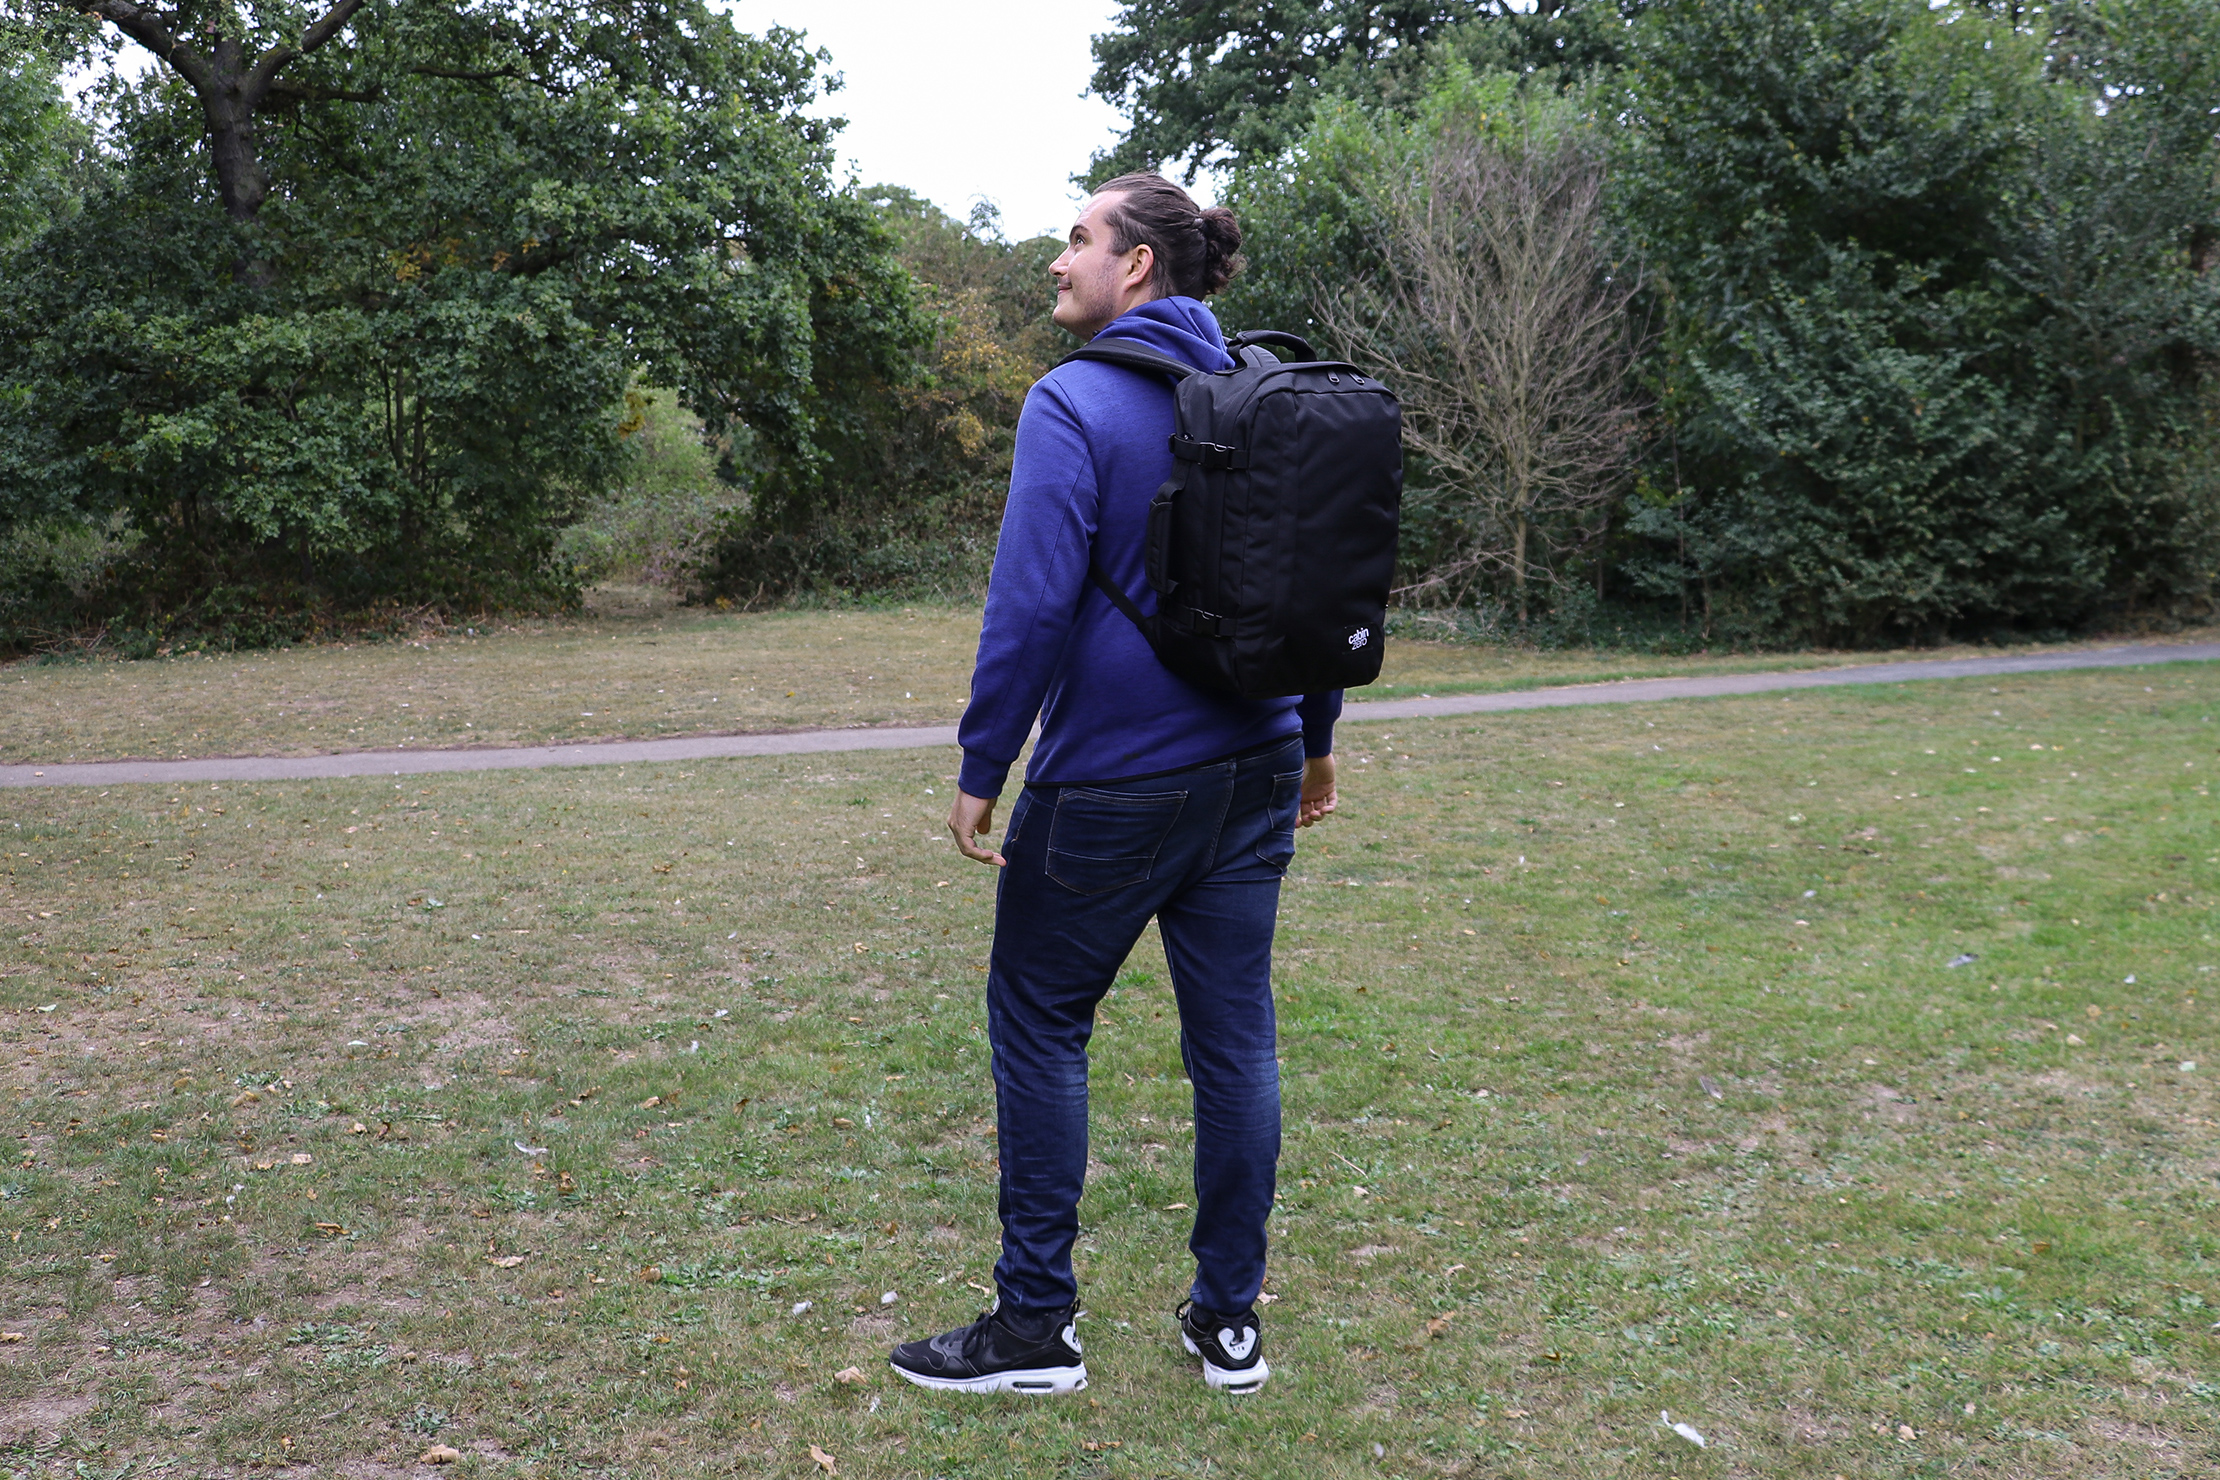 CabinZero Classic Travel Backpack In Essex, England